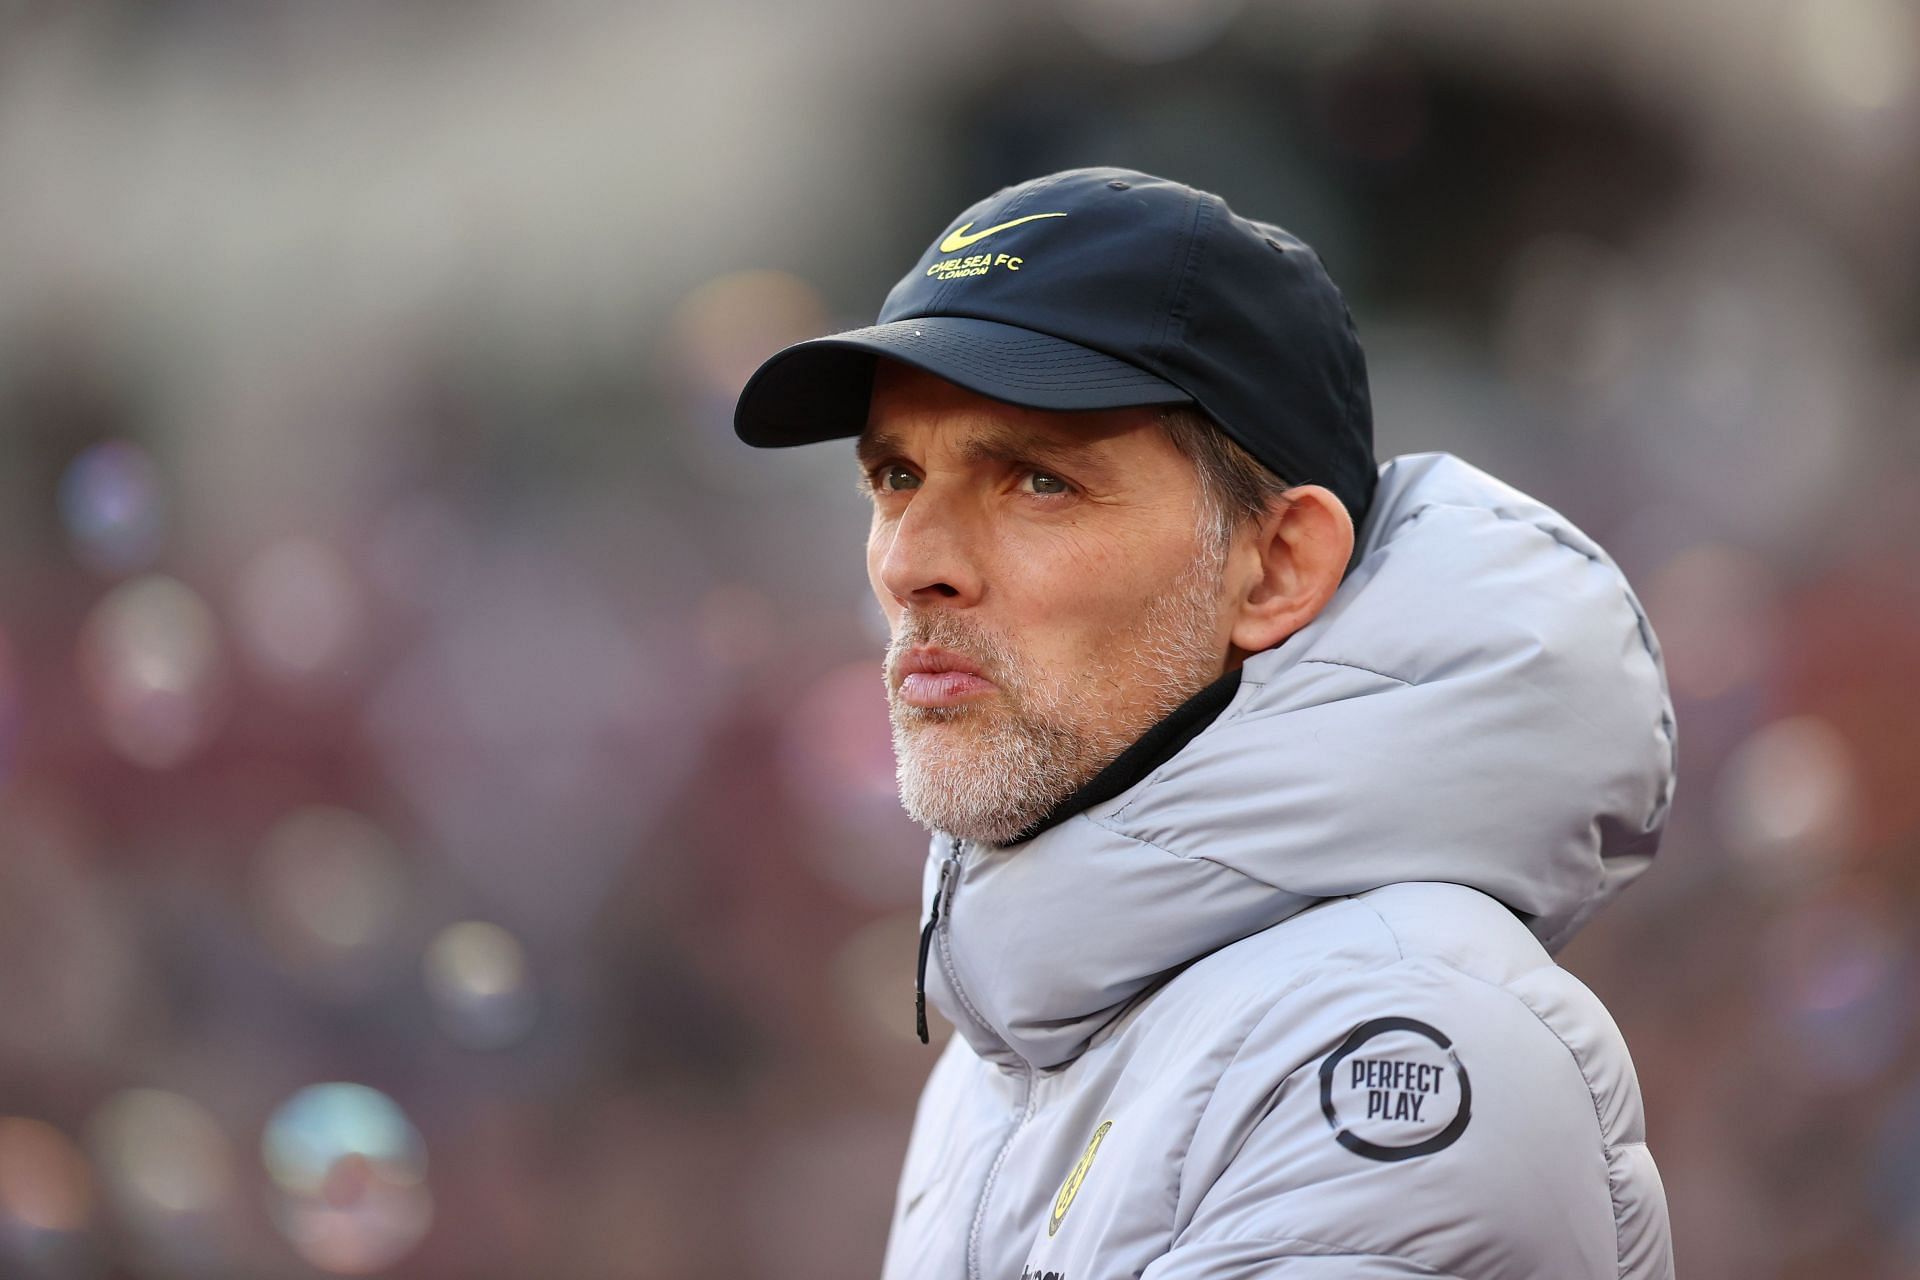 Chelsea manager Thomas Tuchel oversaw a hard-fought win over Leeds United on Saturday.